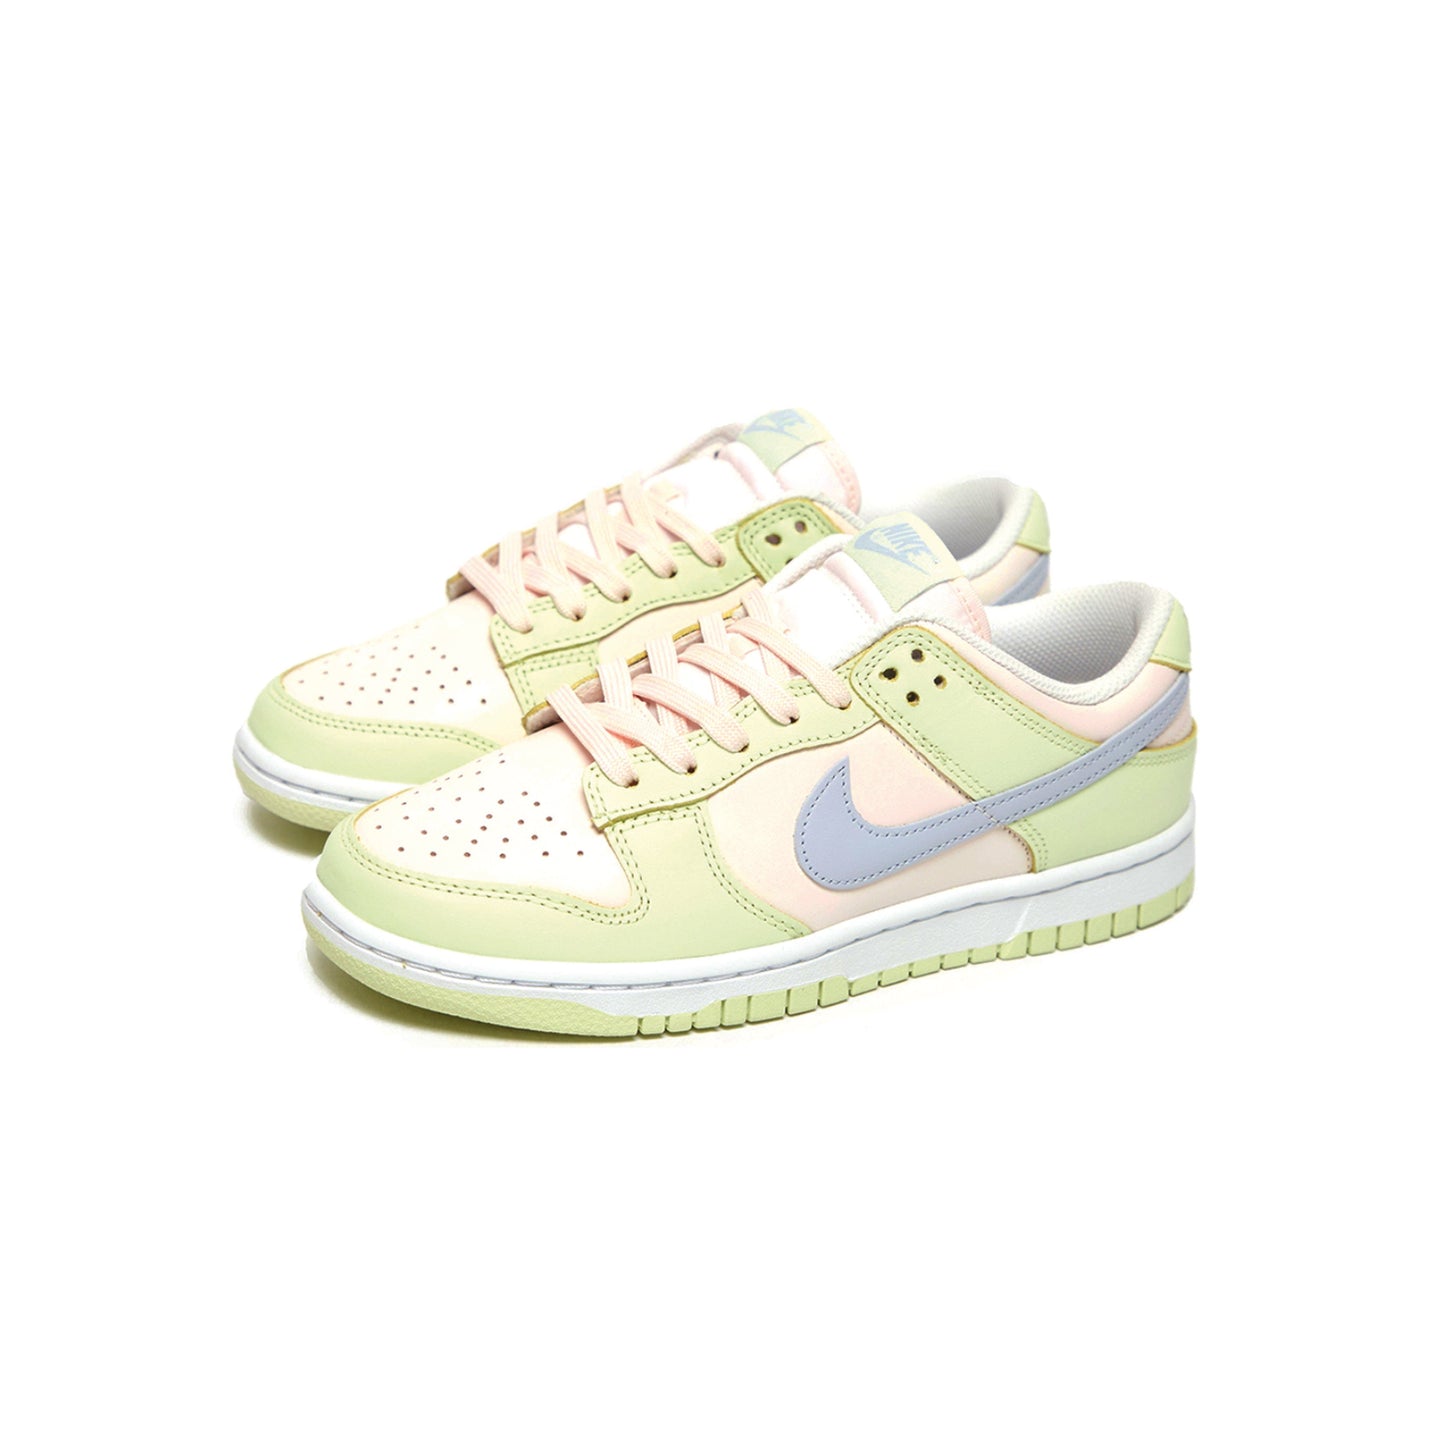 Nike Dunk Low 'Lime Ice' (WMNS)